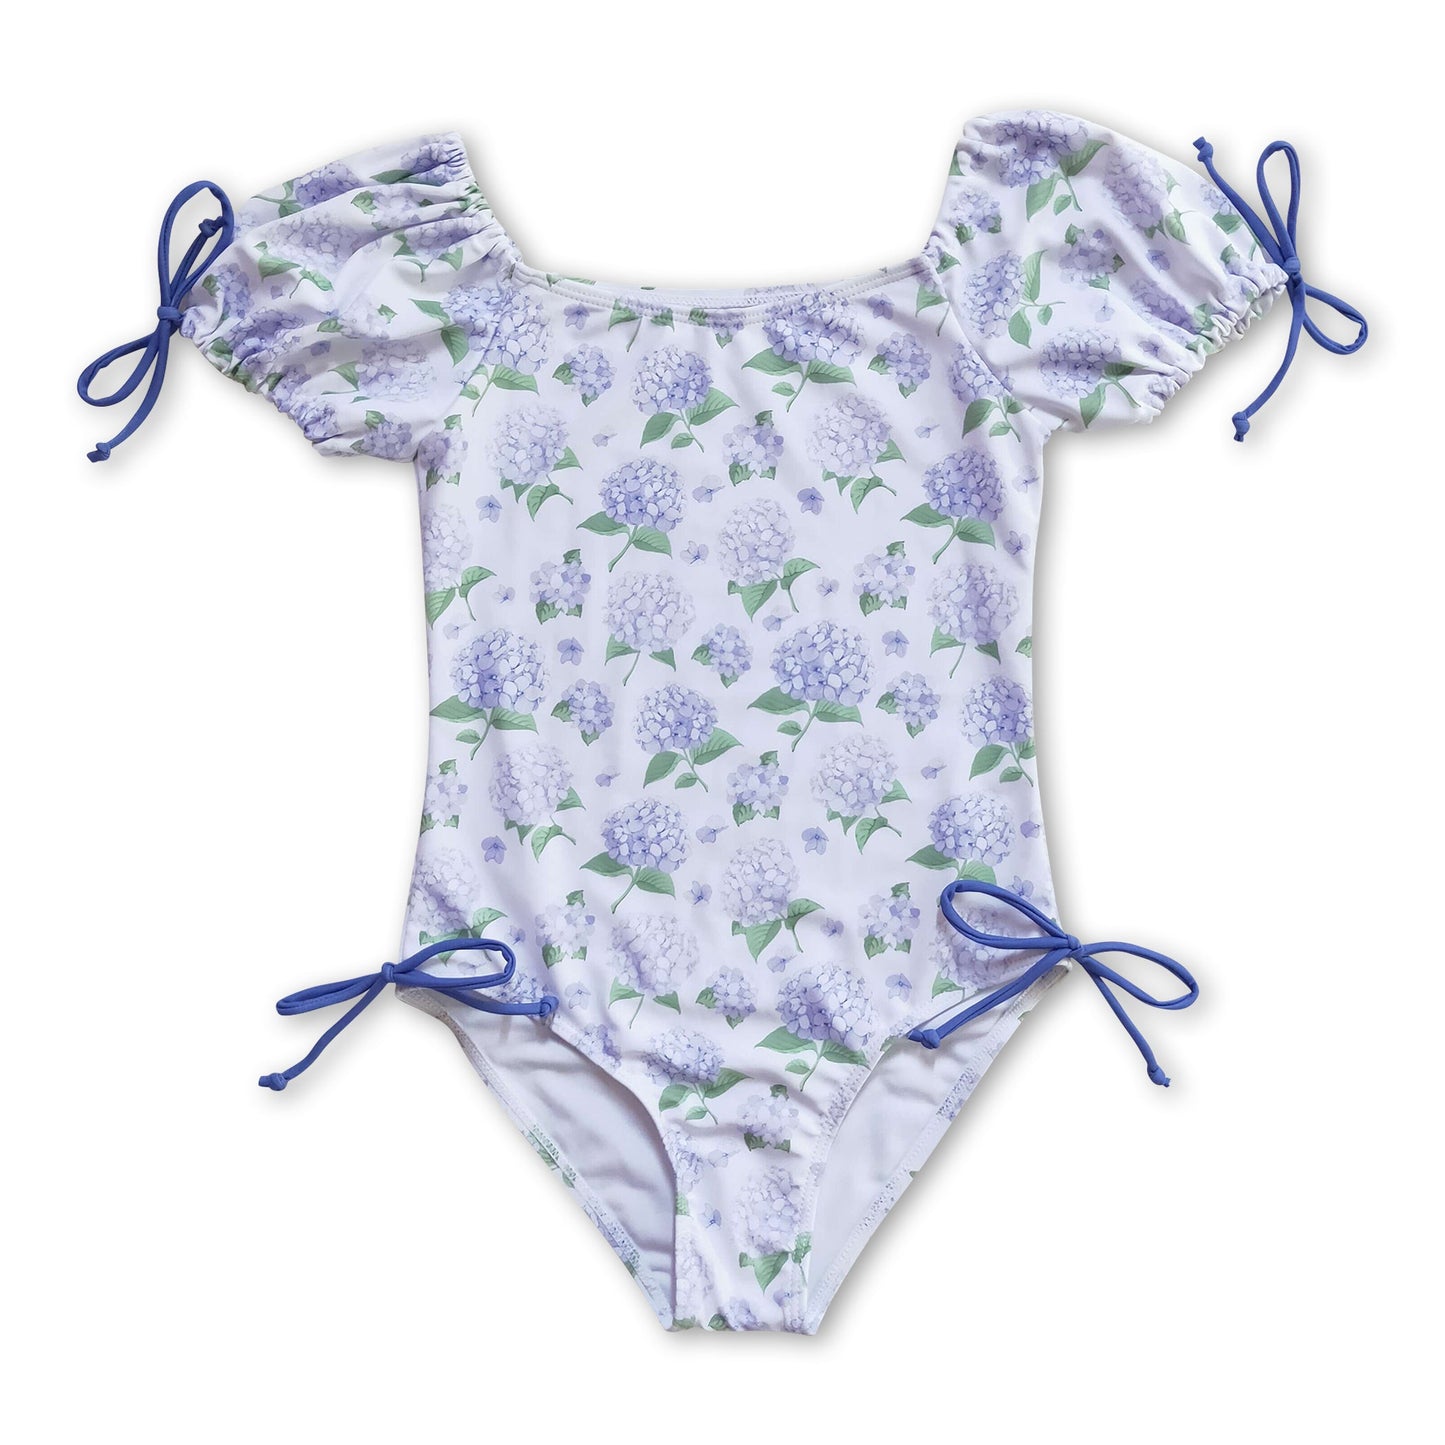 Short sleeves lavender floral one piece girls swimsuit